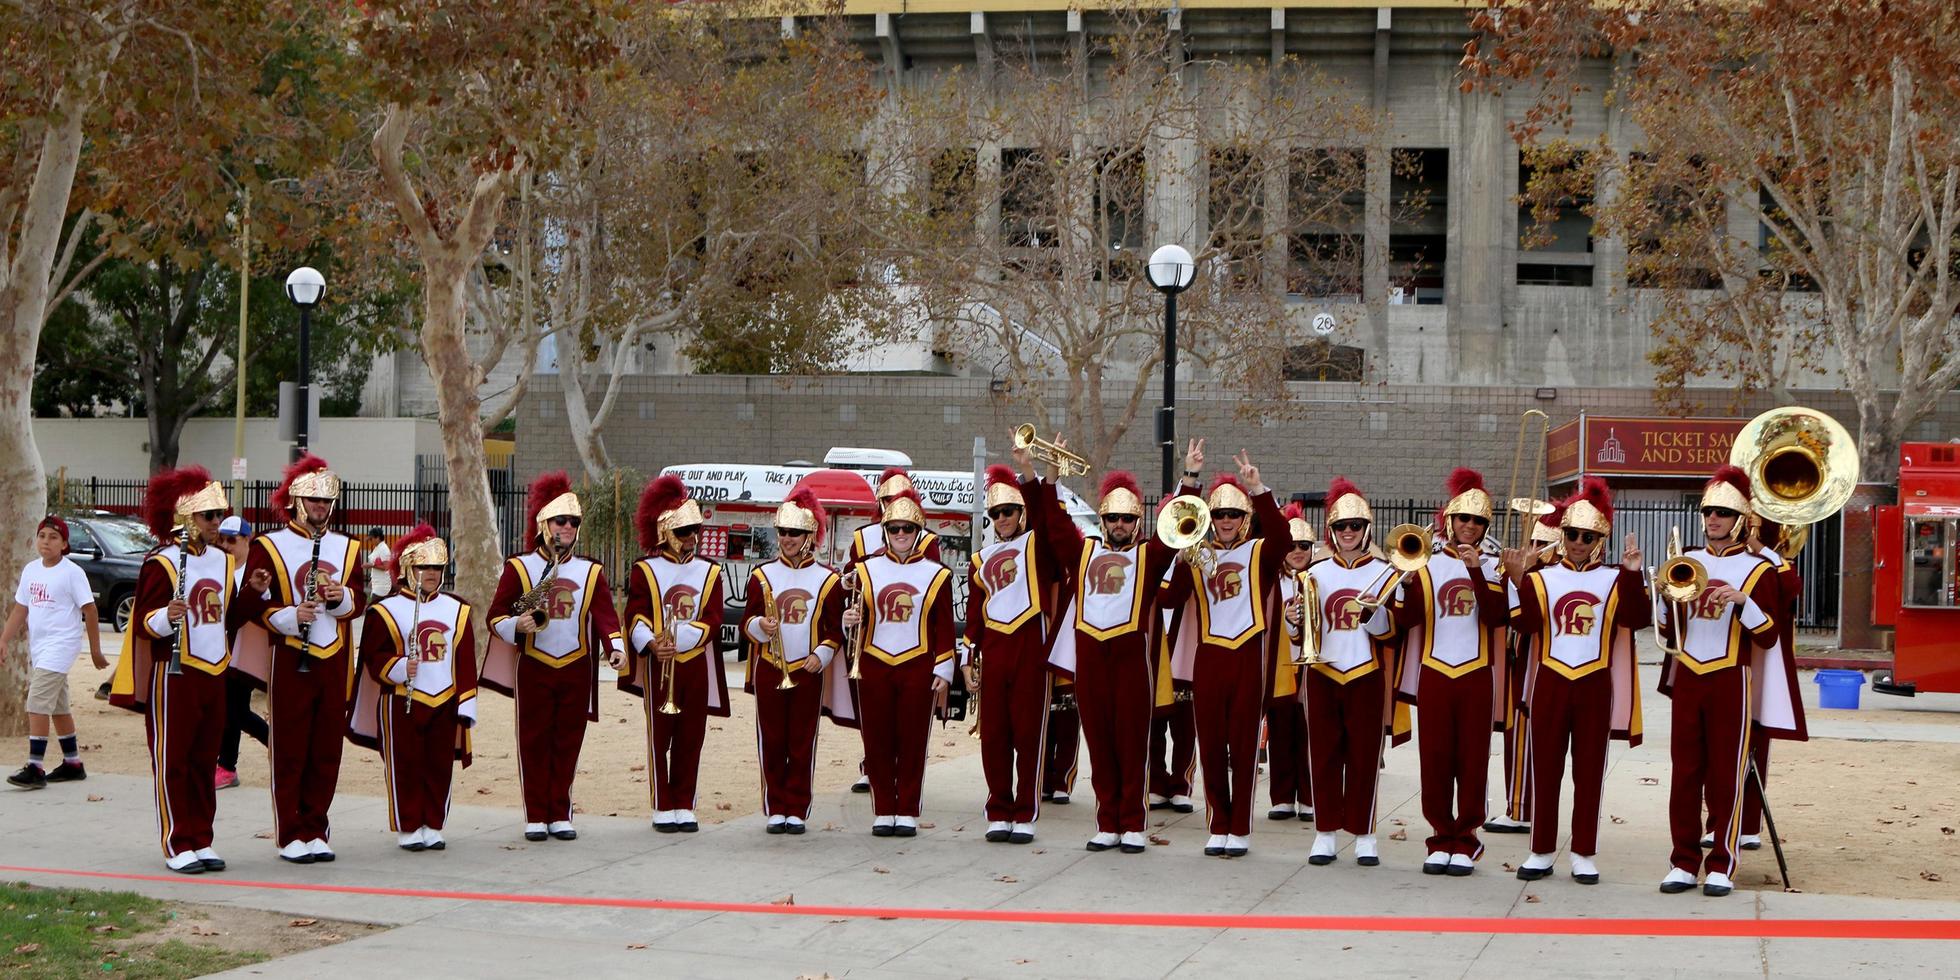 LOS ANGELES, OCT 16 - USC Marching Band at the ALS Association Golden West Chapter Los Angeles County Walk To Defeat ALS at the Exposition Park on October 16, 2016 in Los Angeles, CA photo